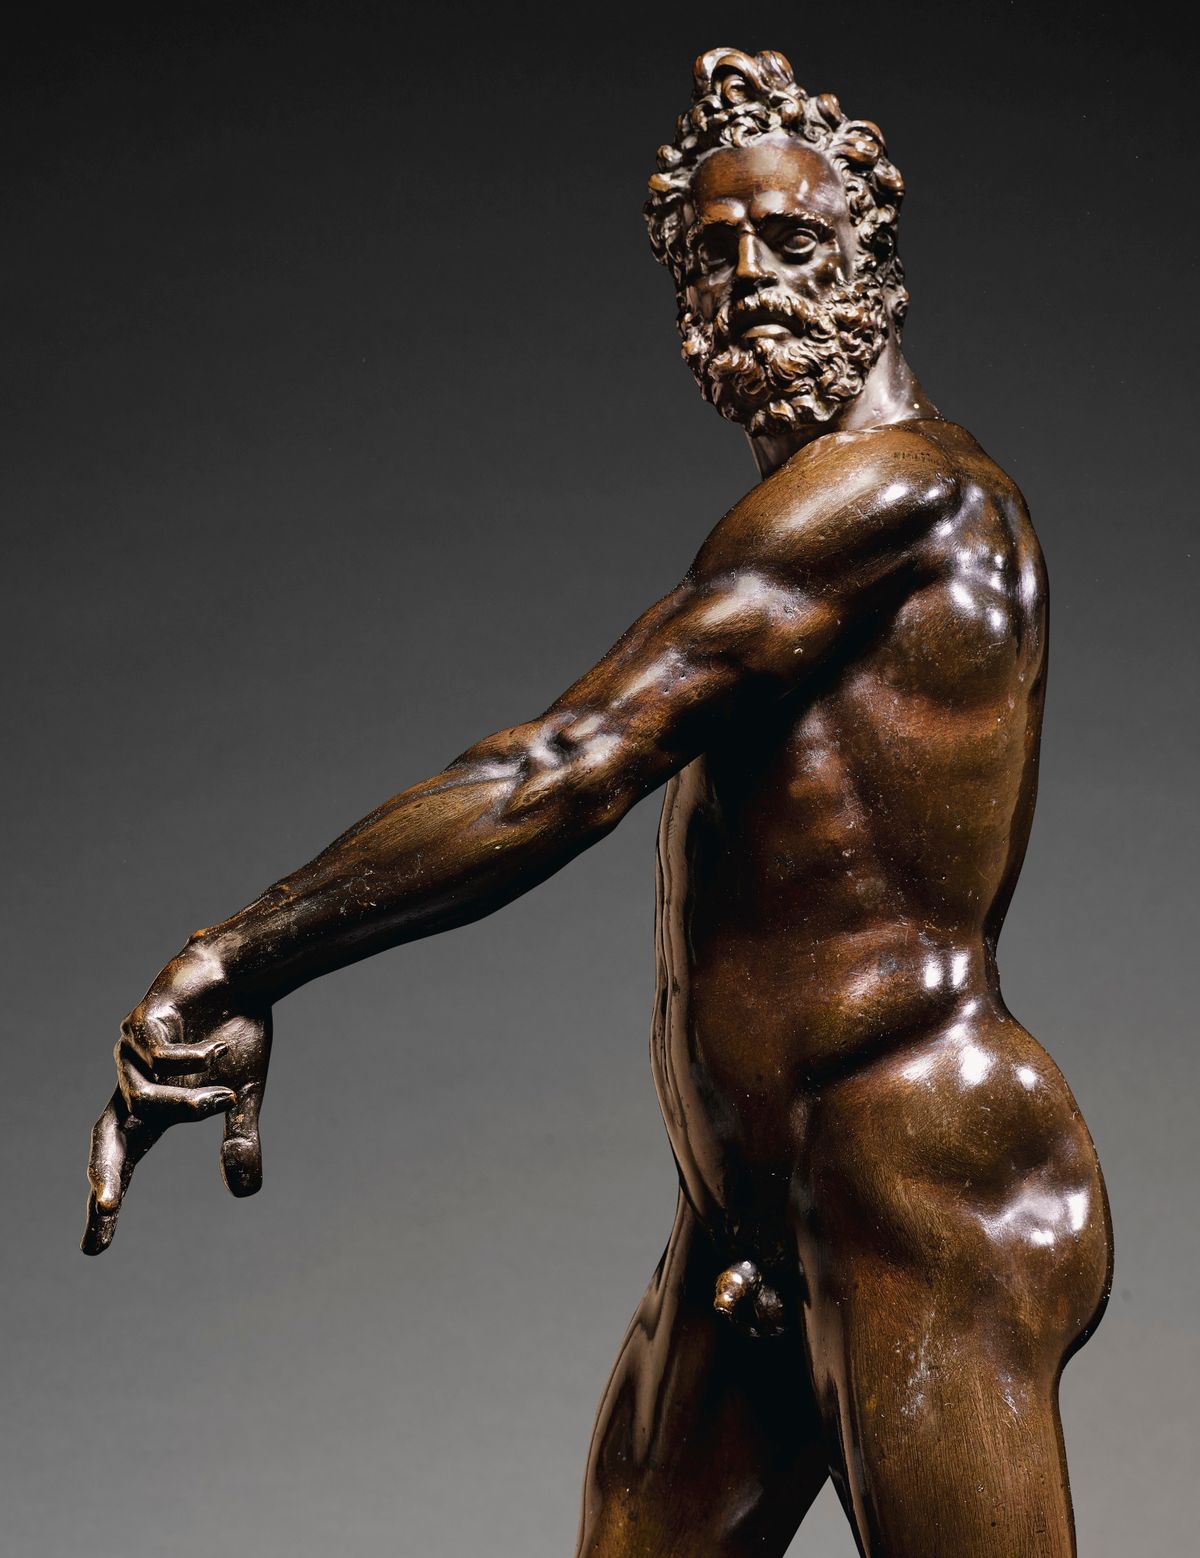 The Dresden Mars by Giambologna (1529-1608), was due to be sold at Sotheby’s Treasures sale on 4 July but has been withdrawn after it sold privately Sotheby's